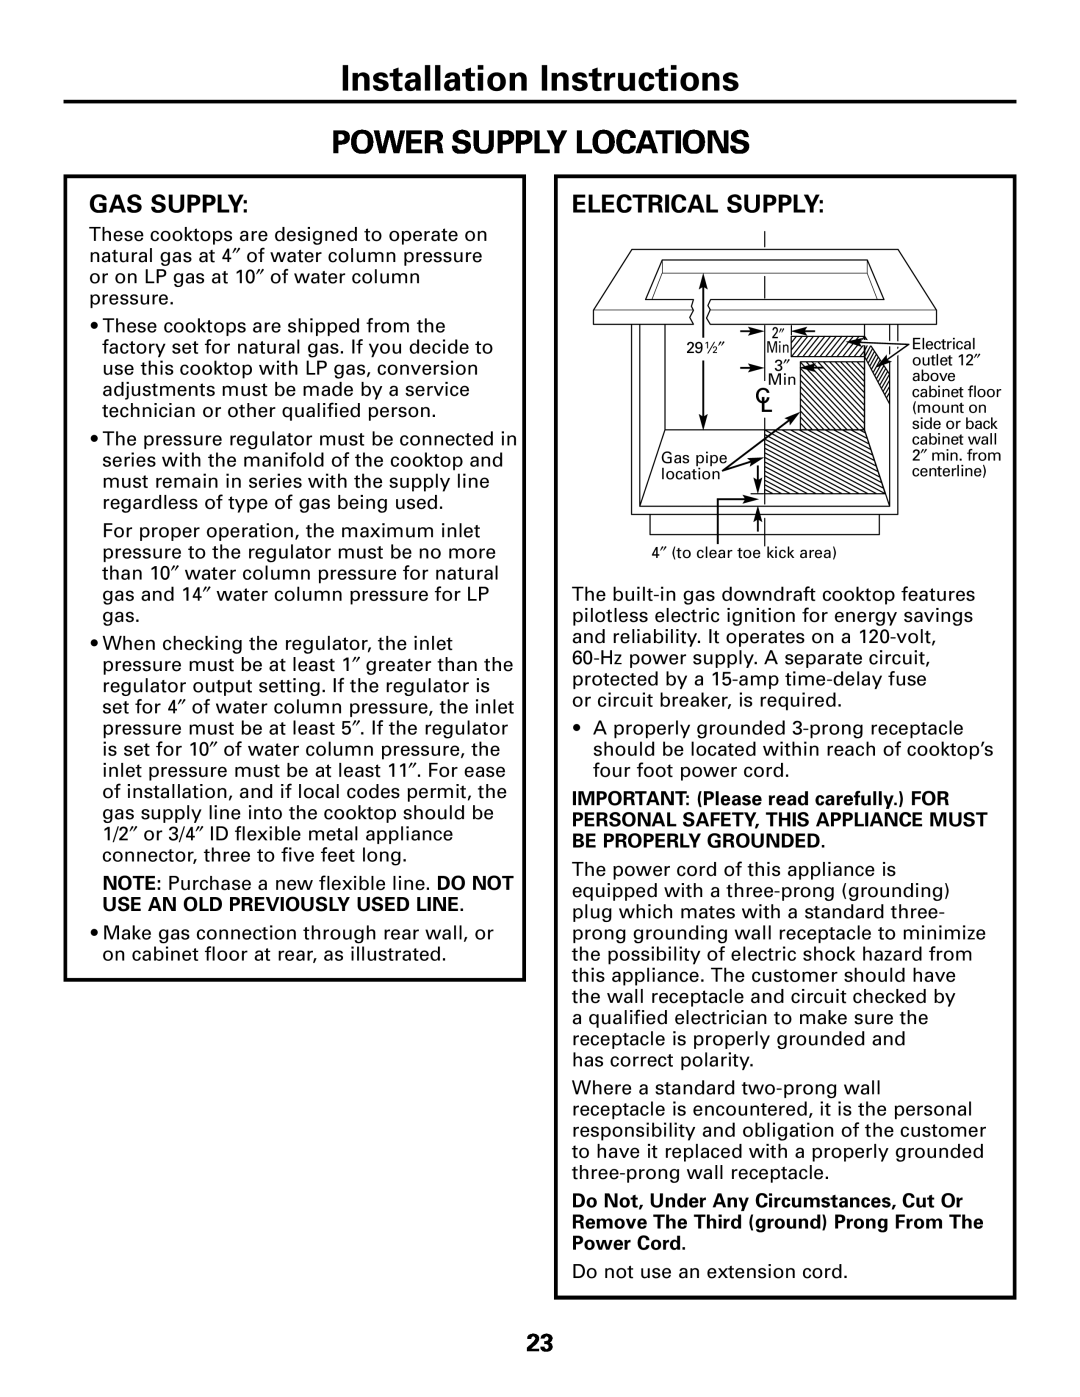 GE JGP989 manual Power Supply Locations, Installation Instructions, Gas Supply, Electrical Supply 